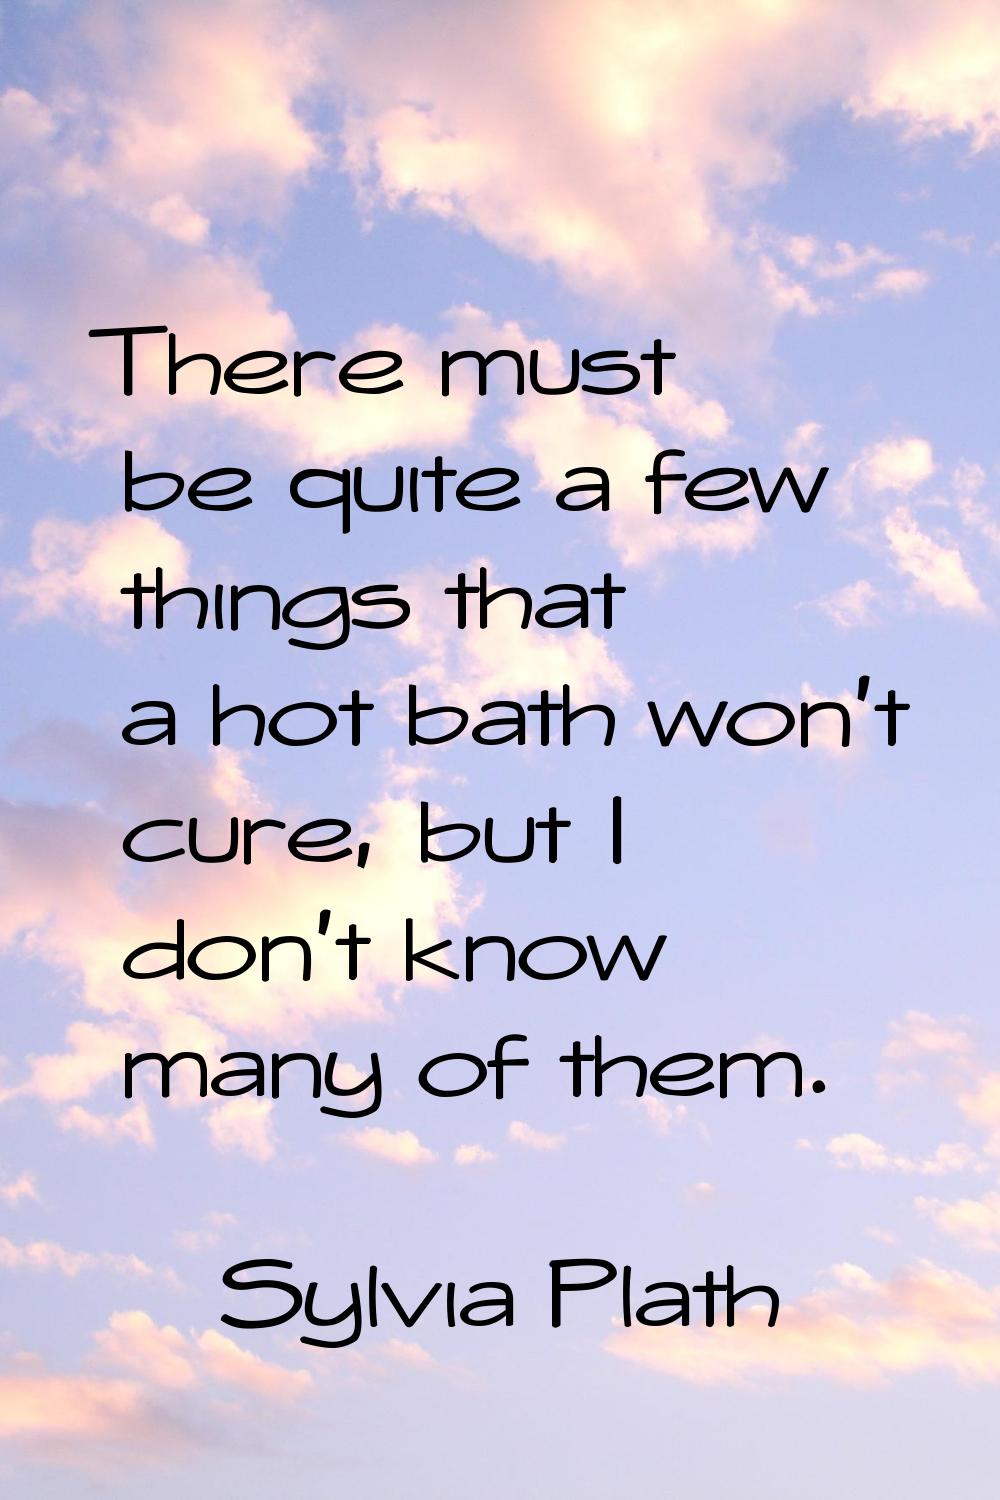 There must be quite a few things that a hot bath won't cure, but I don't know many of them.